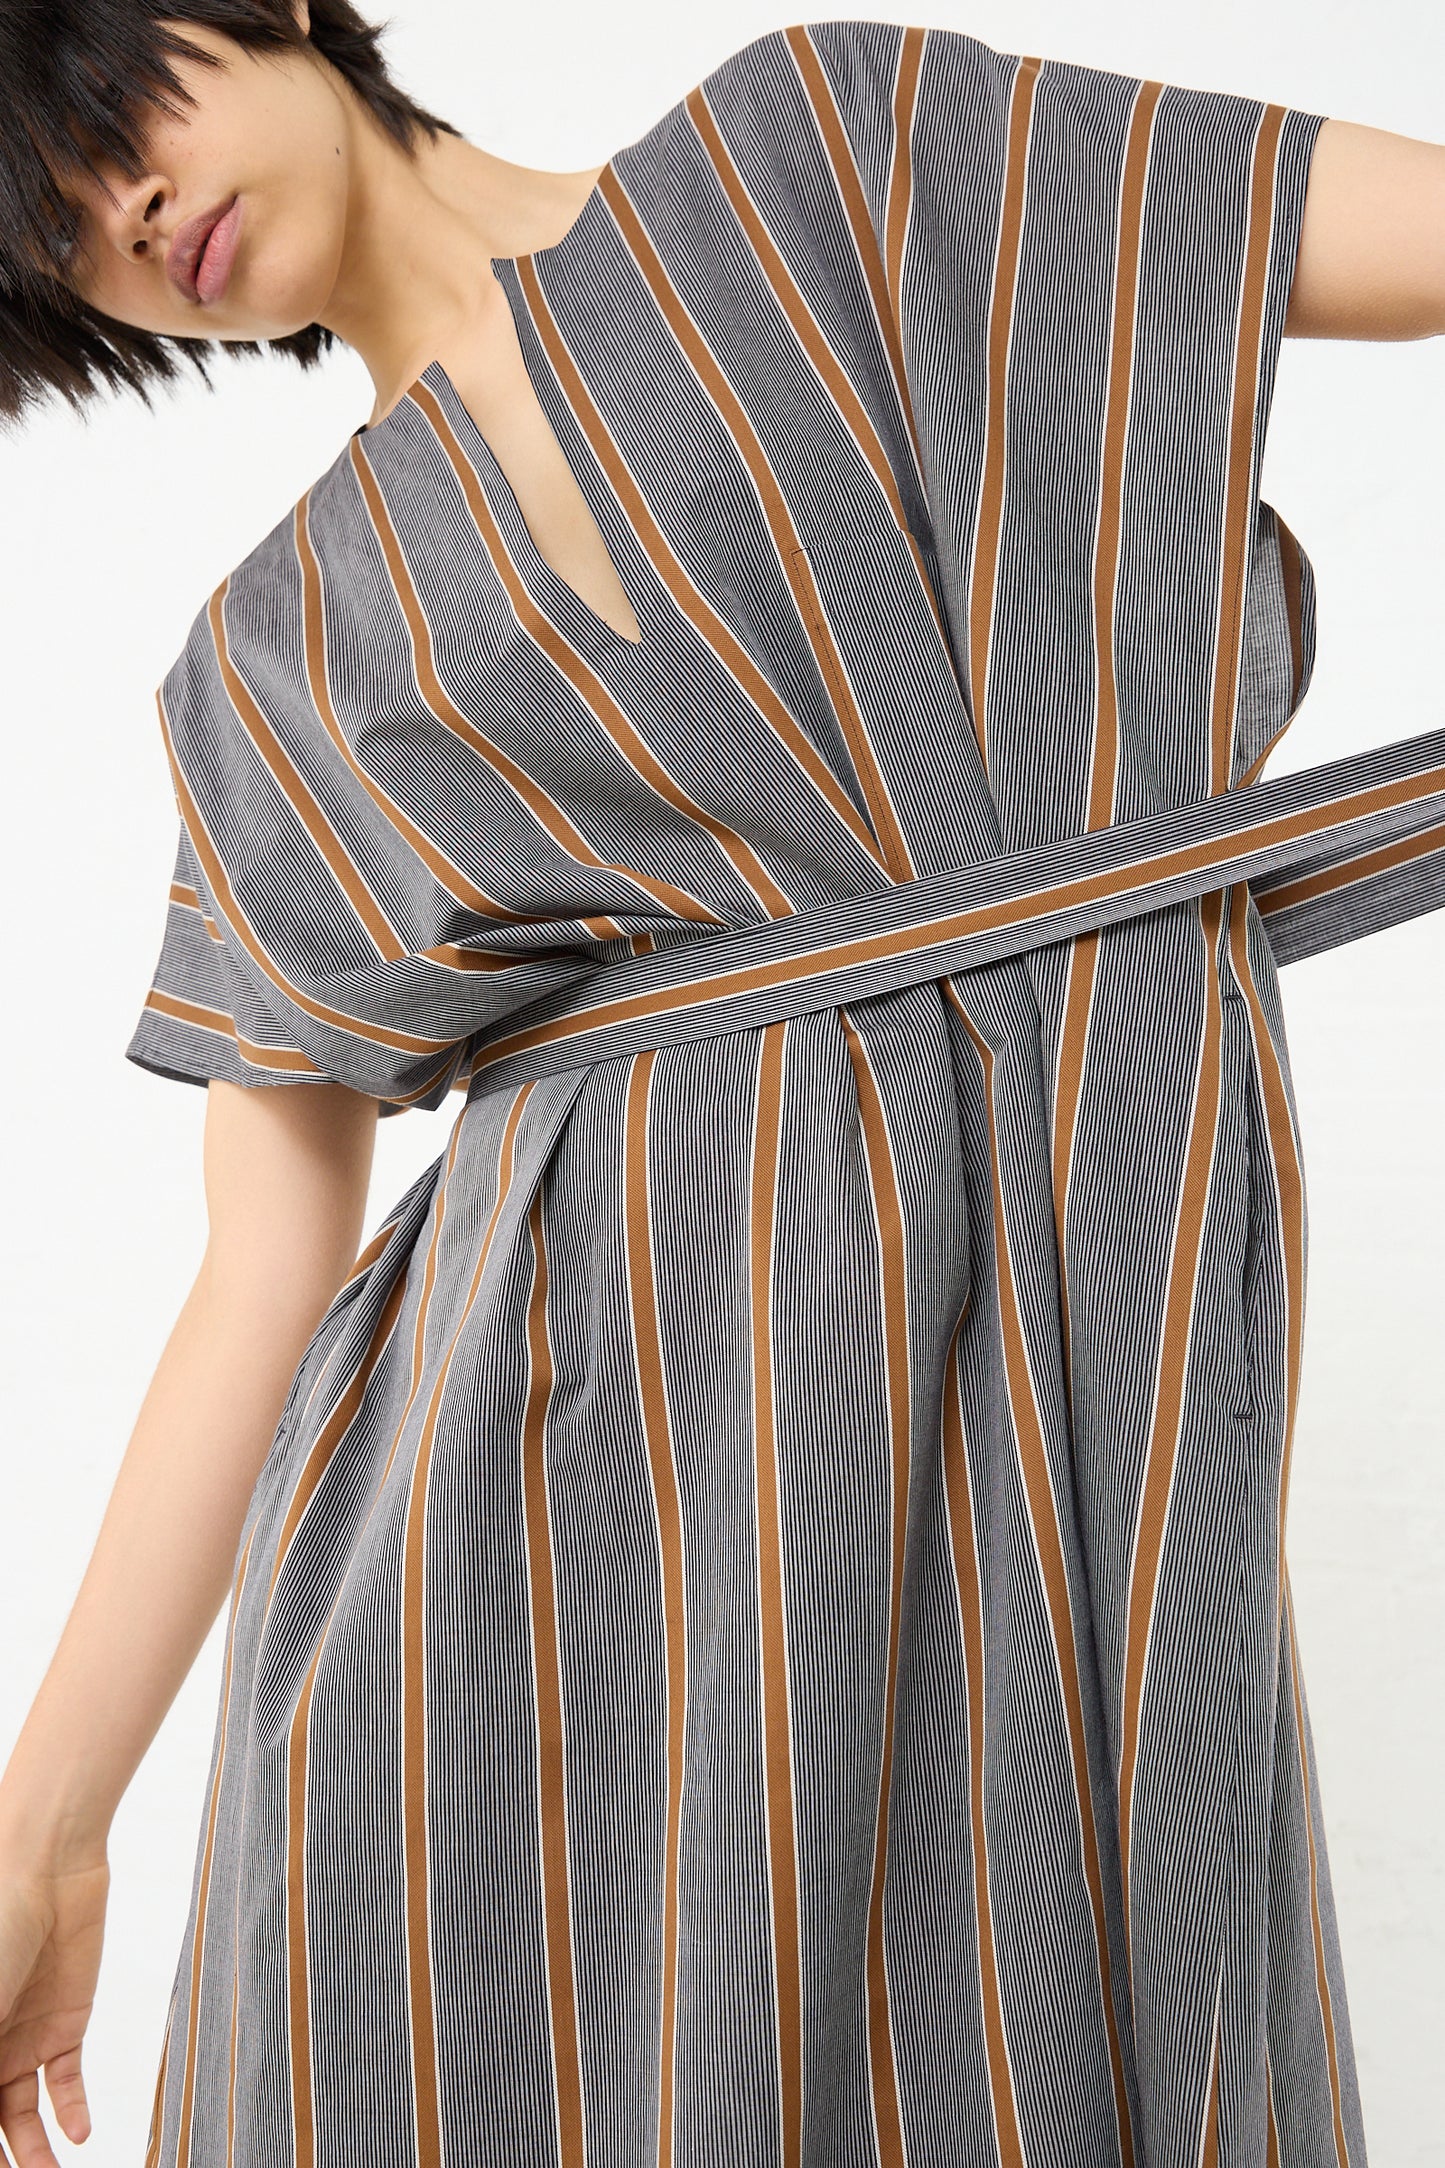 A woman wearing an oversized Cotton Caftan in Striped Black and Noisette (Brown) made by Cristaseya. Front view and up close.